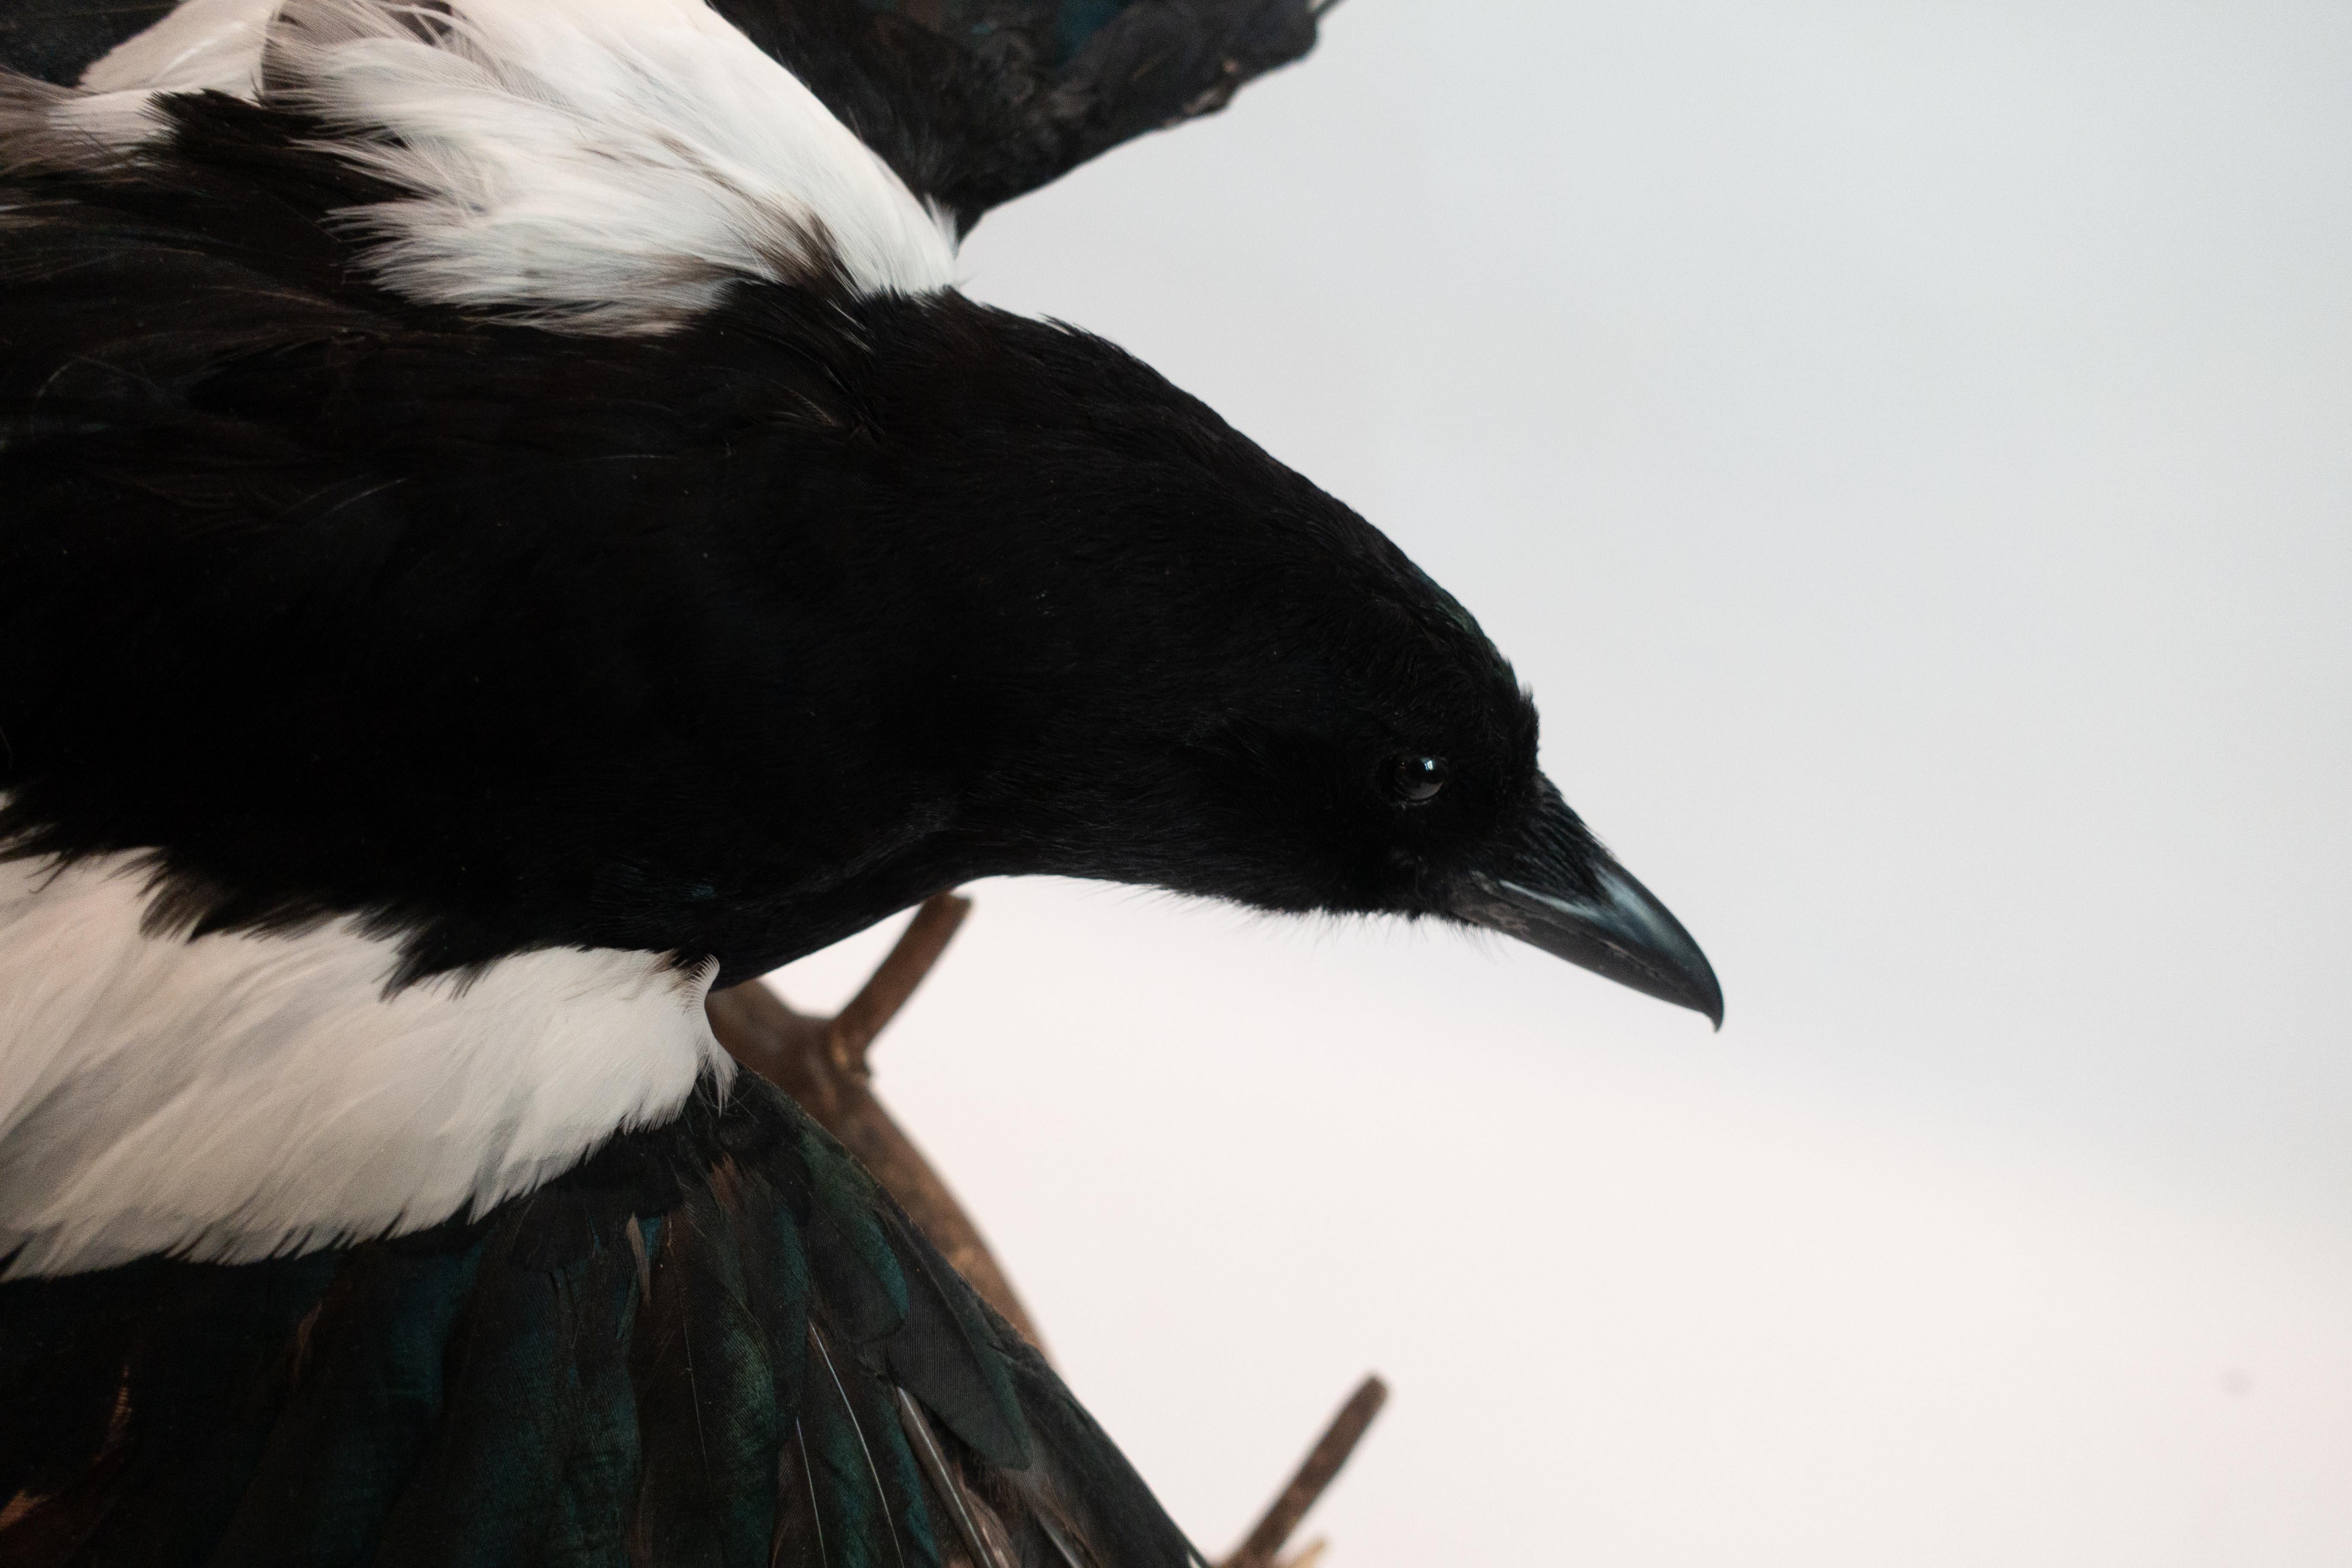 This Magpie mounted taxidermy specimen is posed with his wings in flight, ready to fly away from his mount back to his home, Deyrolle, in Paris. Place him on your coffee table, book shelf, or your nightstand, he's sure to be a welcome addition.